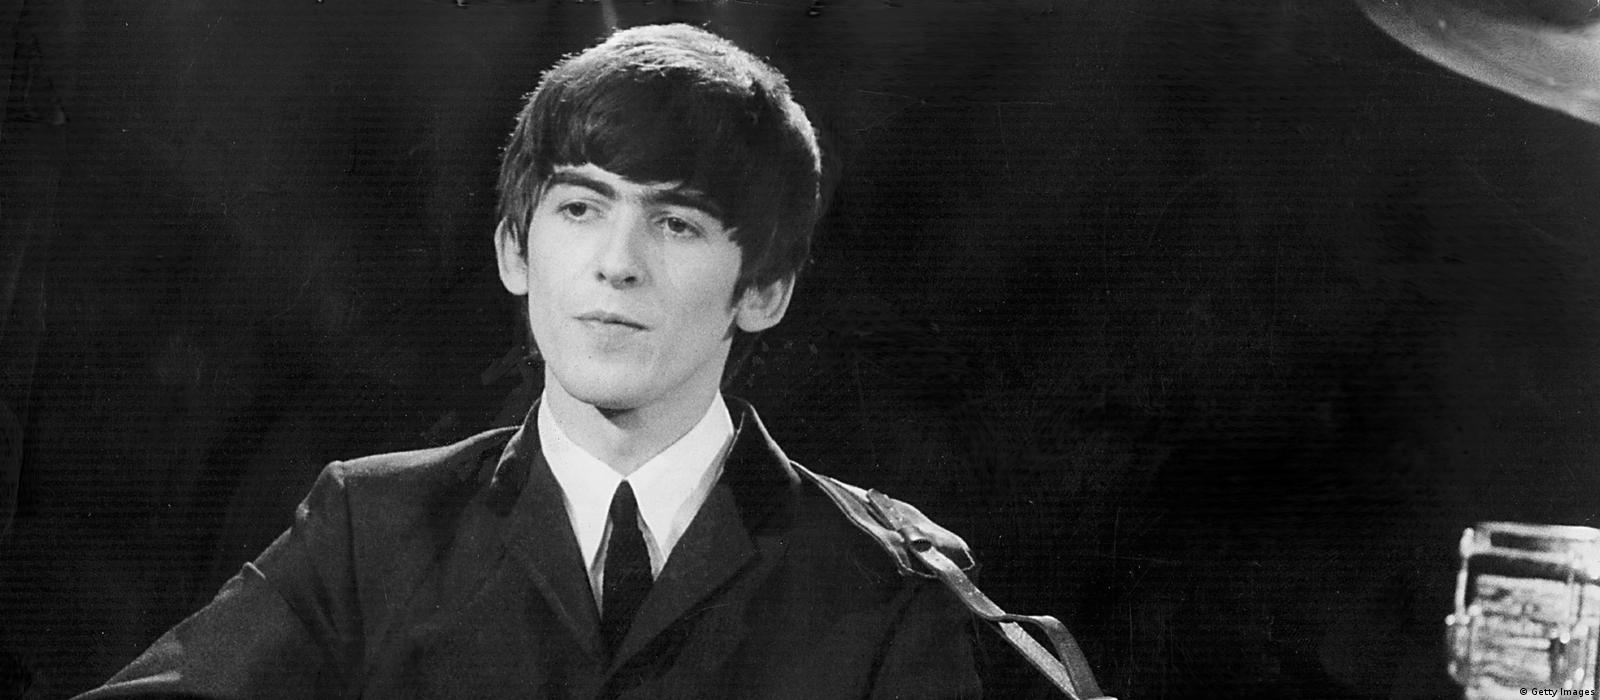 george harrison young color